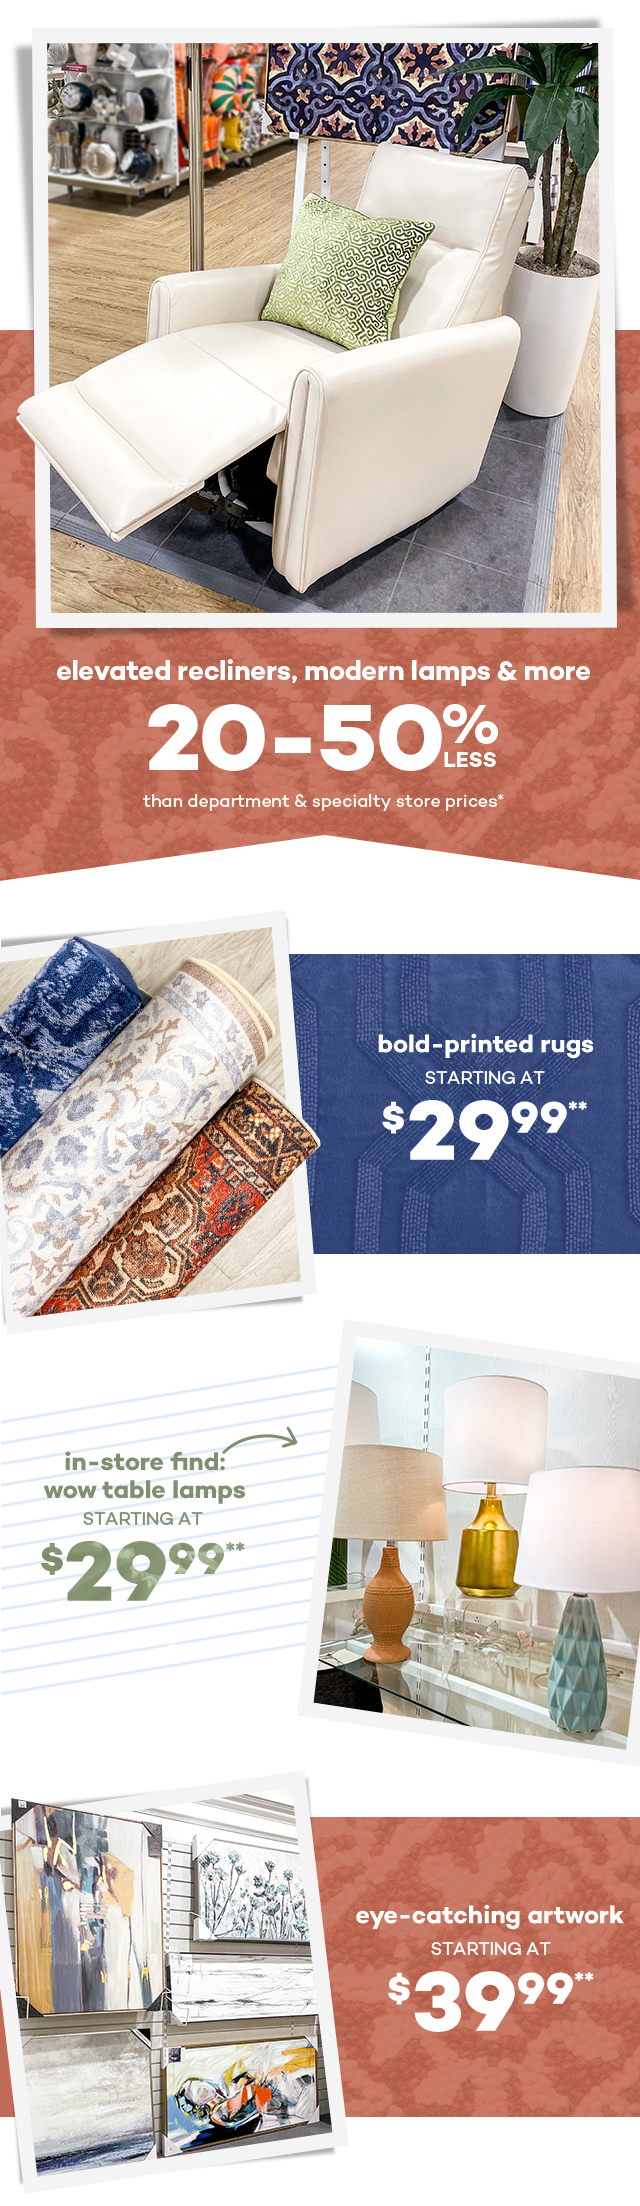 Elevated recliners, modern lamps and more 20 to 50 percent less than department and specialty store prices.* Bold-printed rugs starting at $29.99.** In-store find wow table lamps starting at $29.99.** Eye-catching artwork starting at $39.99.**